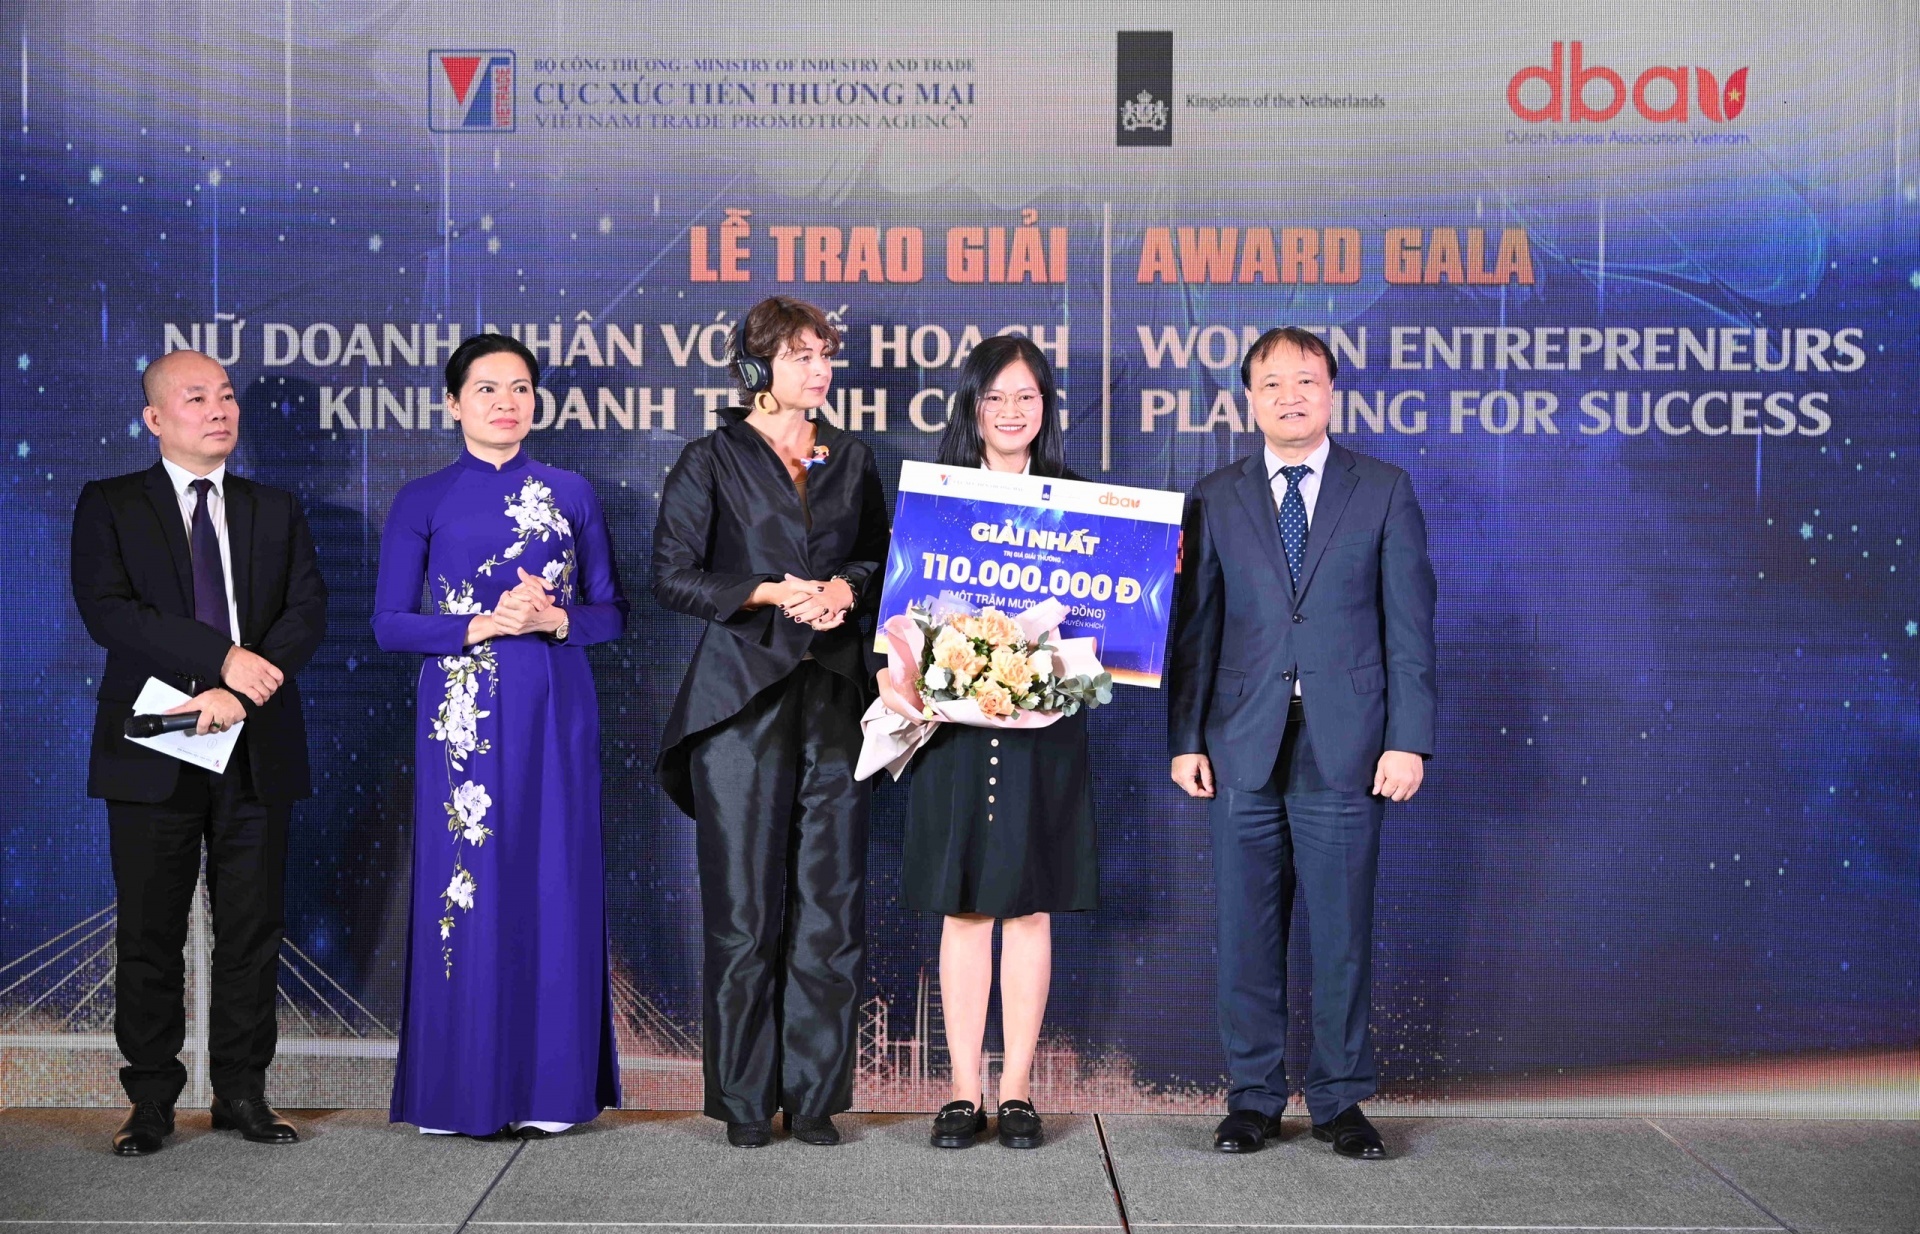 Award gala for the competition “Women entrepreneurs planning for success”